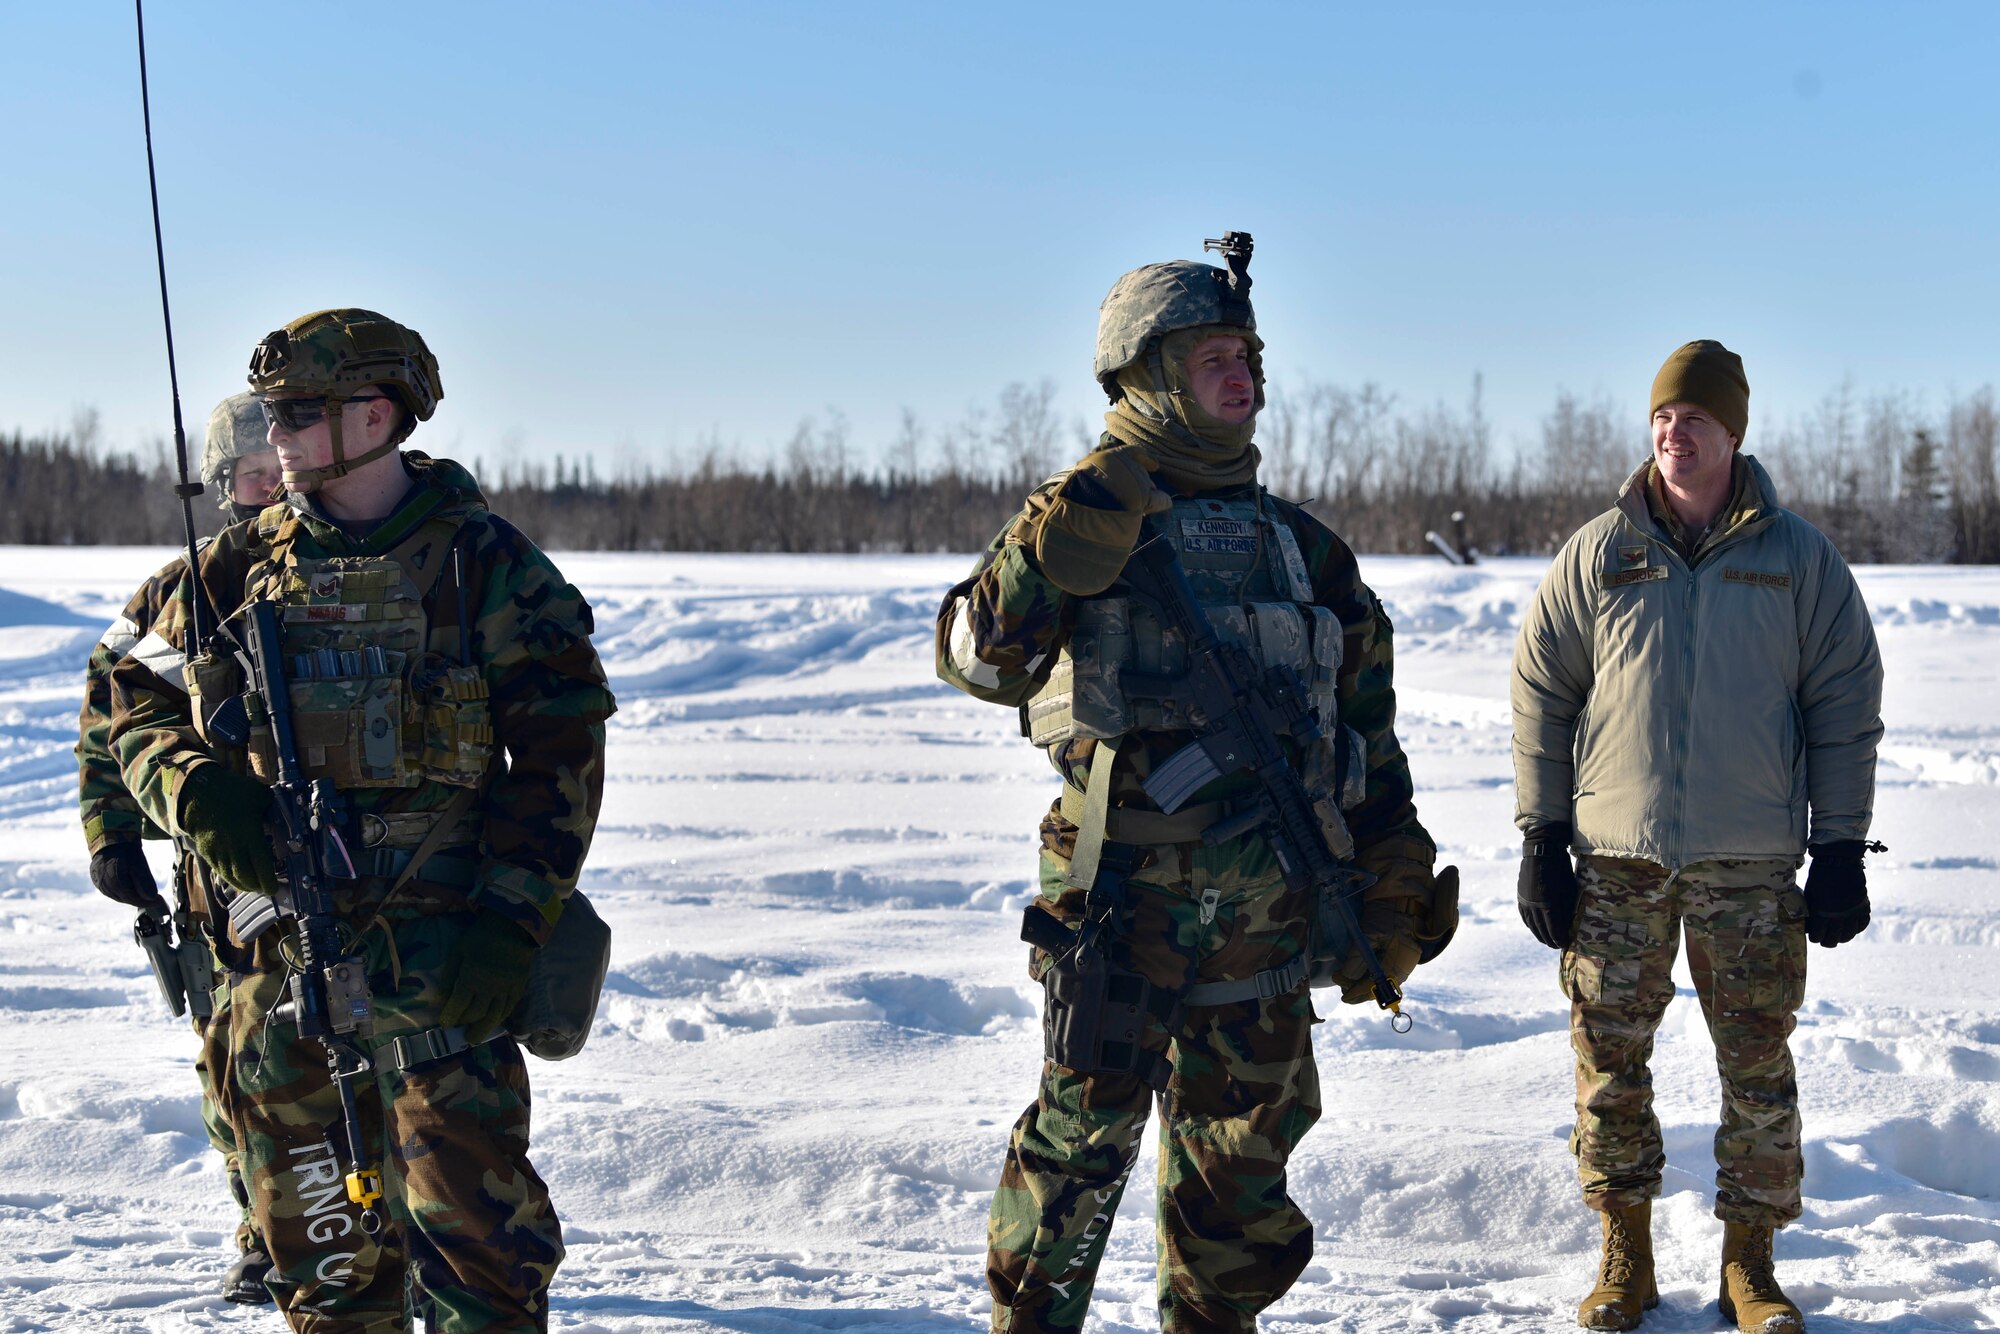 U.S. Air Force Maj. Michael Kennedy, 354th Security Forces Squadron (SFS) commander, addresses Airmen assigned to the 354th SFS during a medical evacuation (MEDEVAC) exercise on Eielson Air Force Base, Alaska, Feb. 26, 2020. The MEDEVAC exercise was designed to train defenders on how to properly call in a helicopter in the event of a casualty. (U.S. Air Force photo by Senior Airman Beaux Hebert)